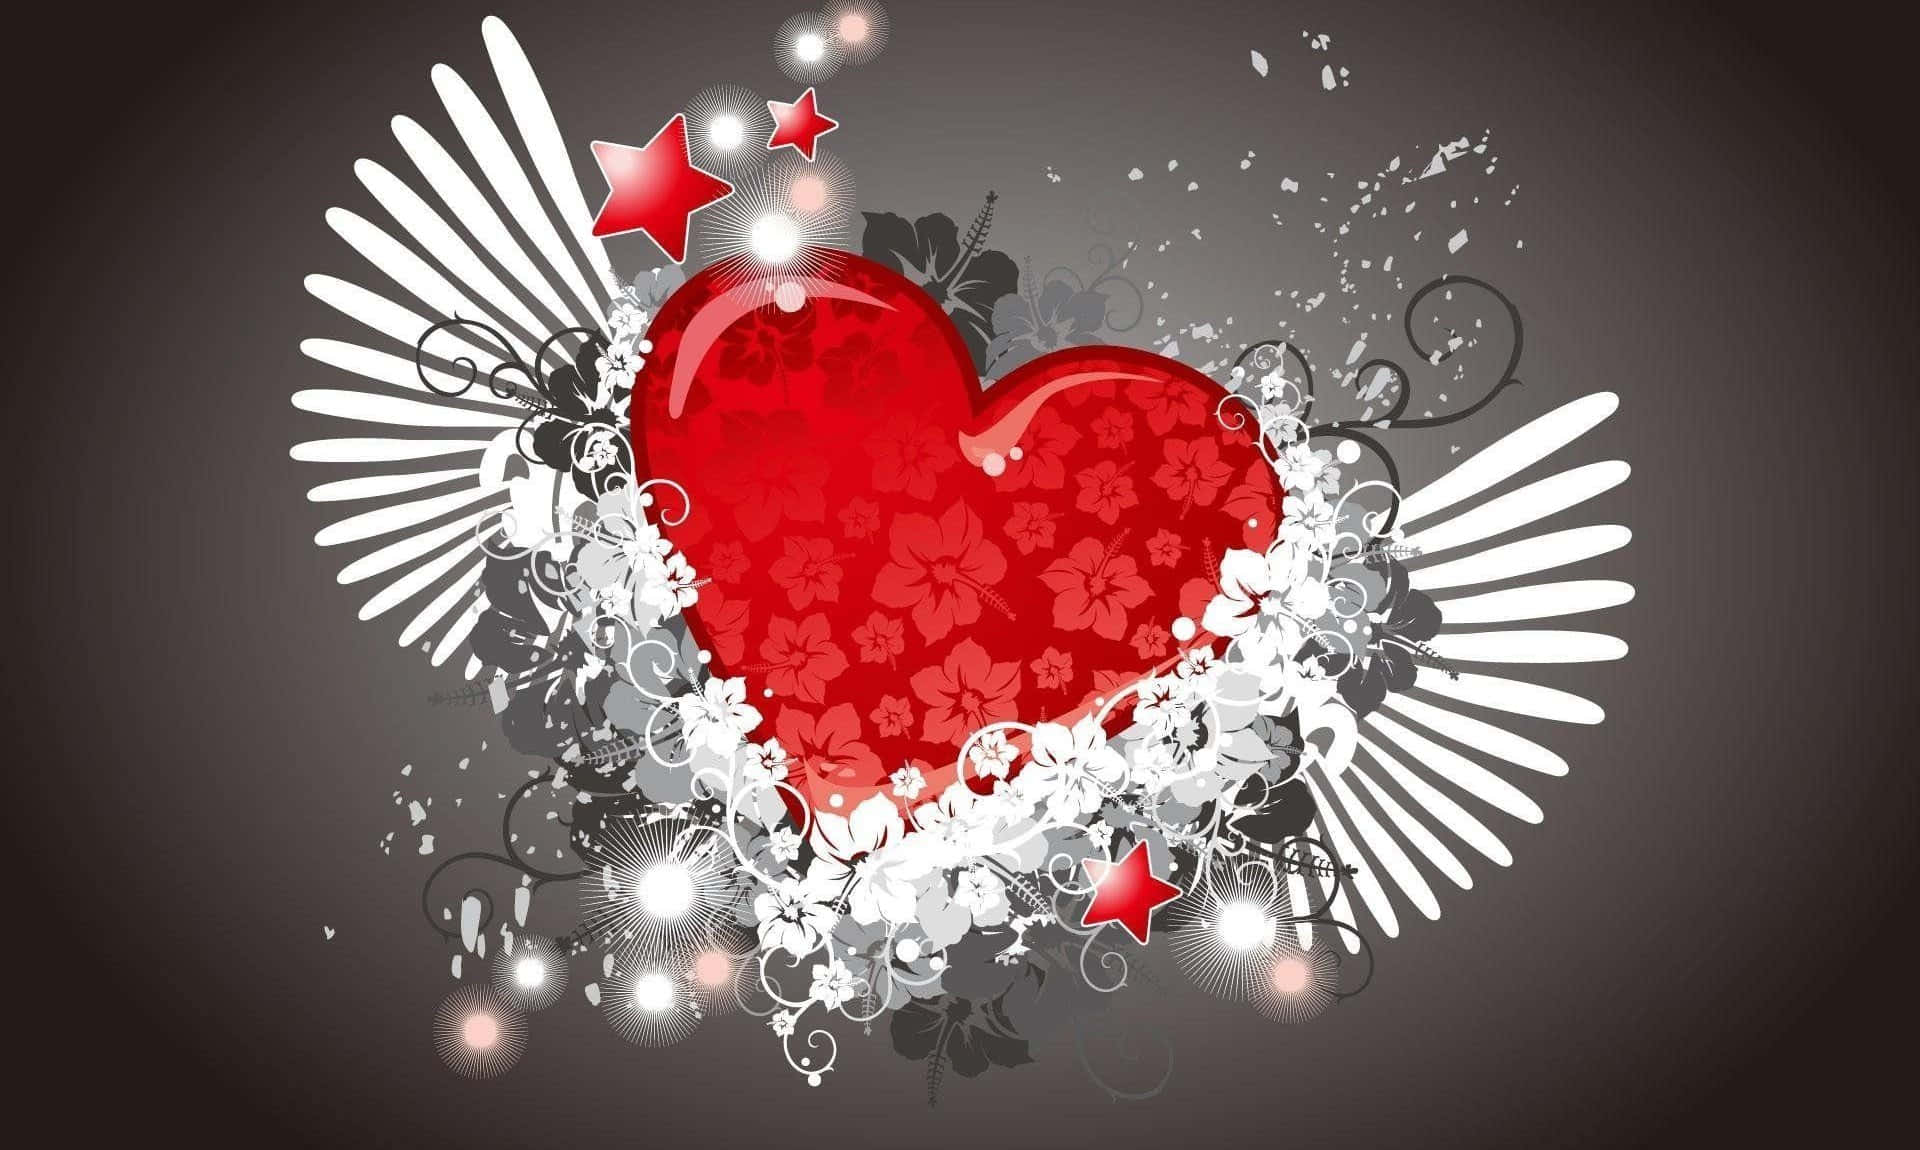 A Red Heart With Wings And Stars On A Dark Background